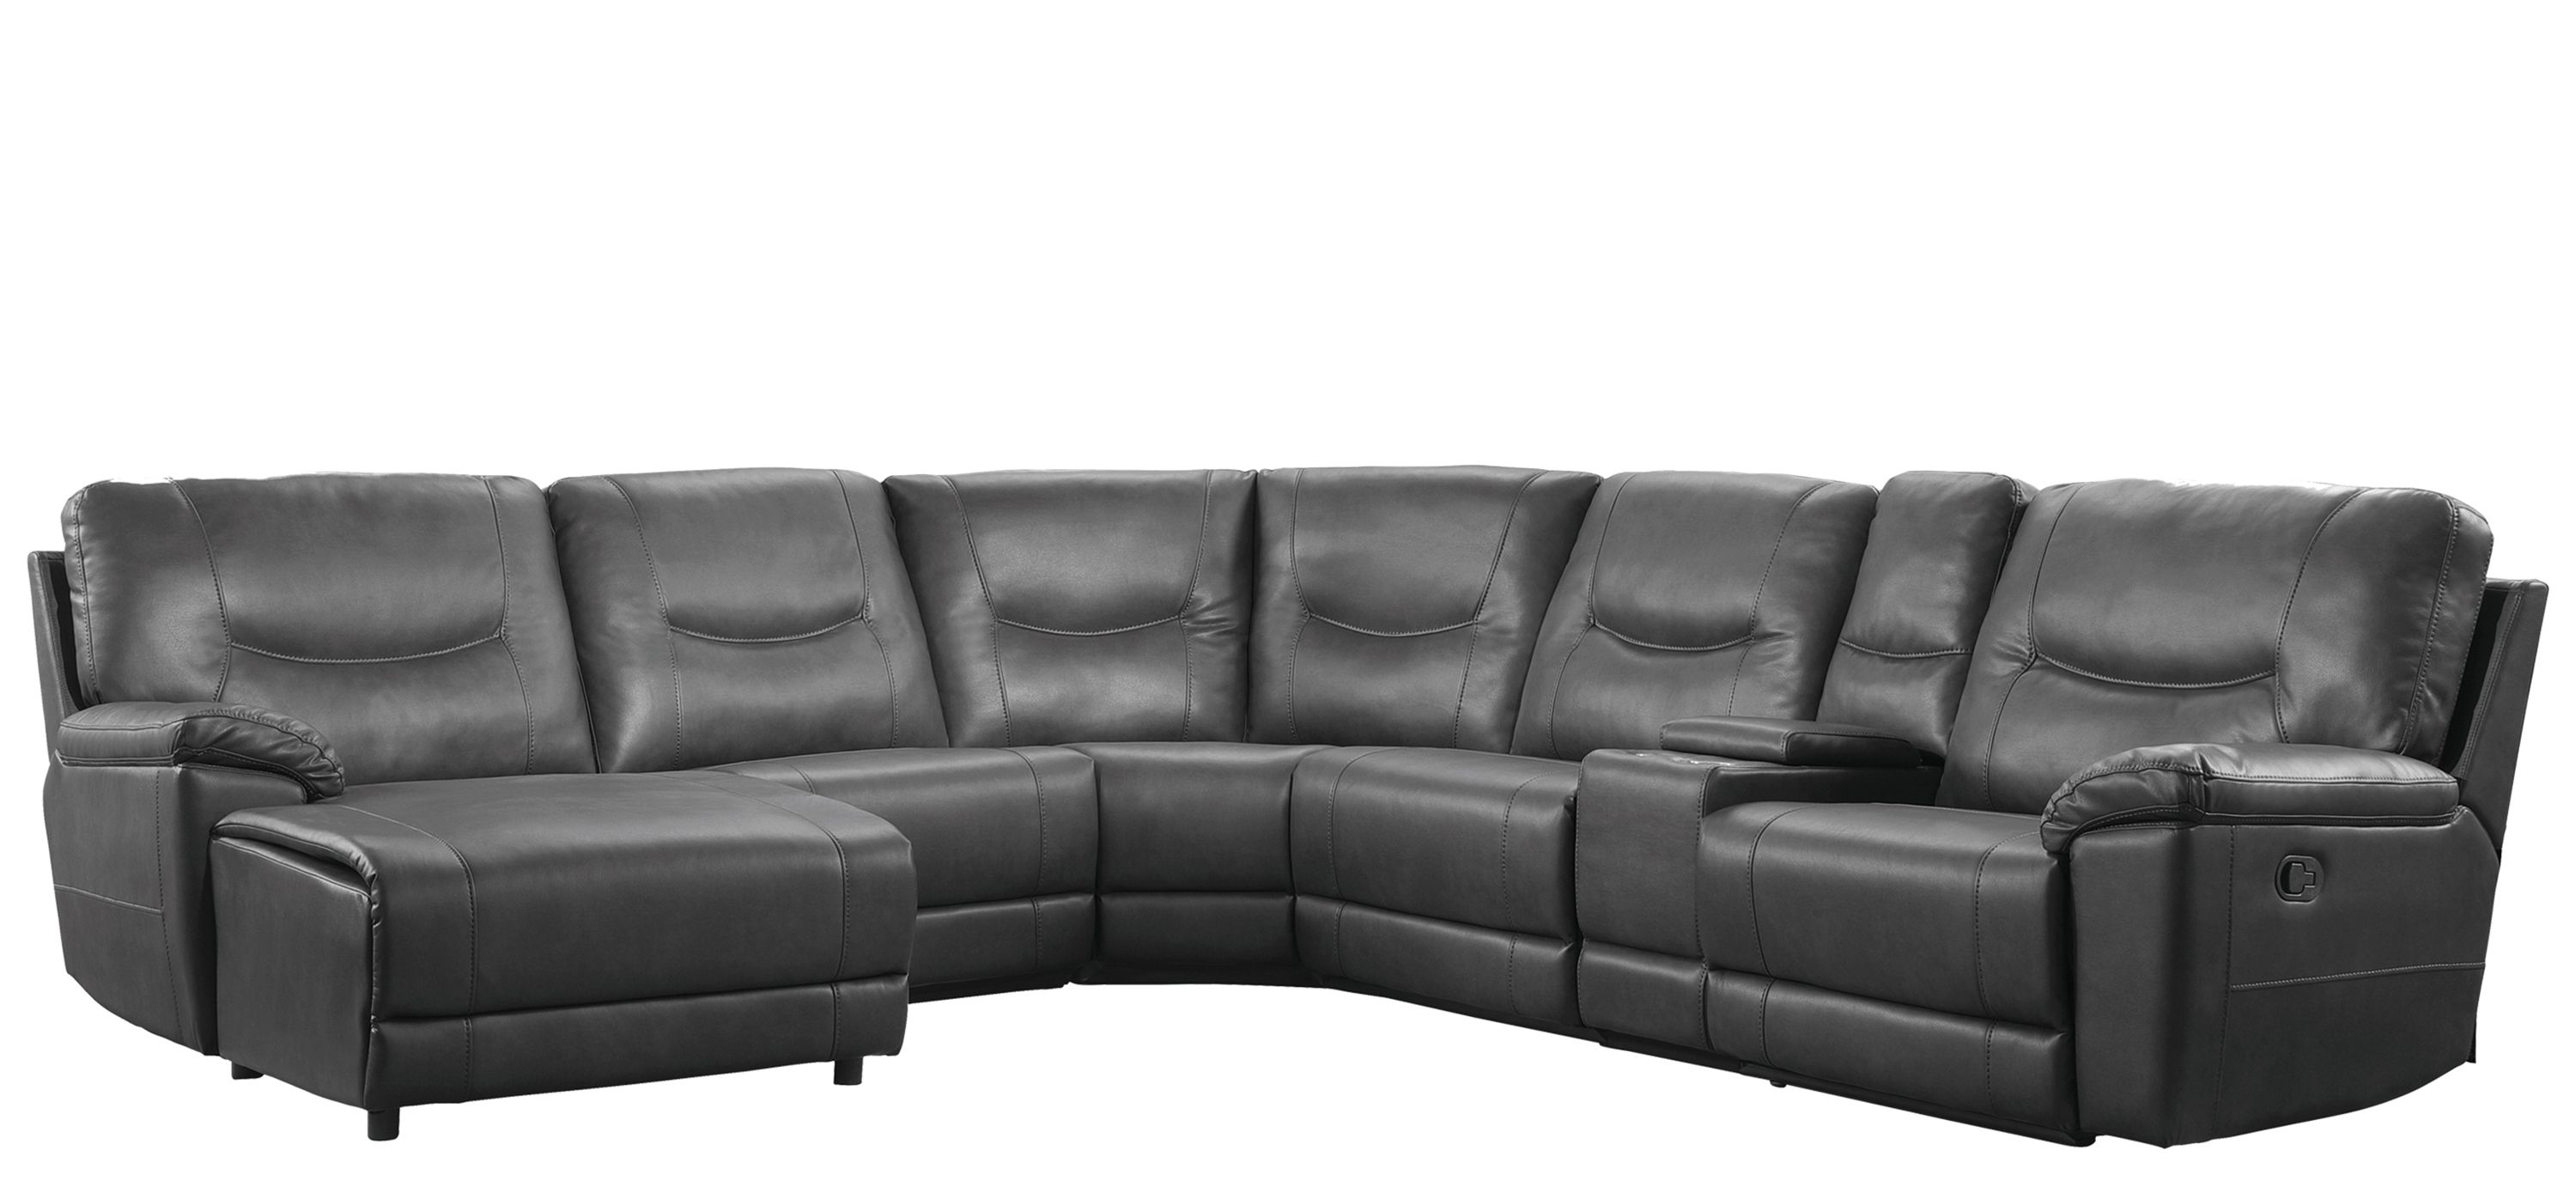 Emilio 6-Piece Modular Reclining Sectional with Left Chaise